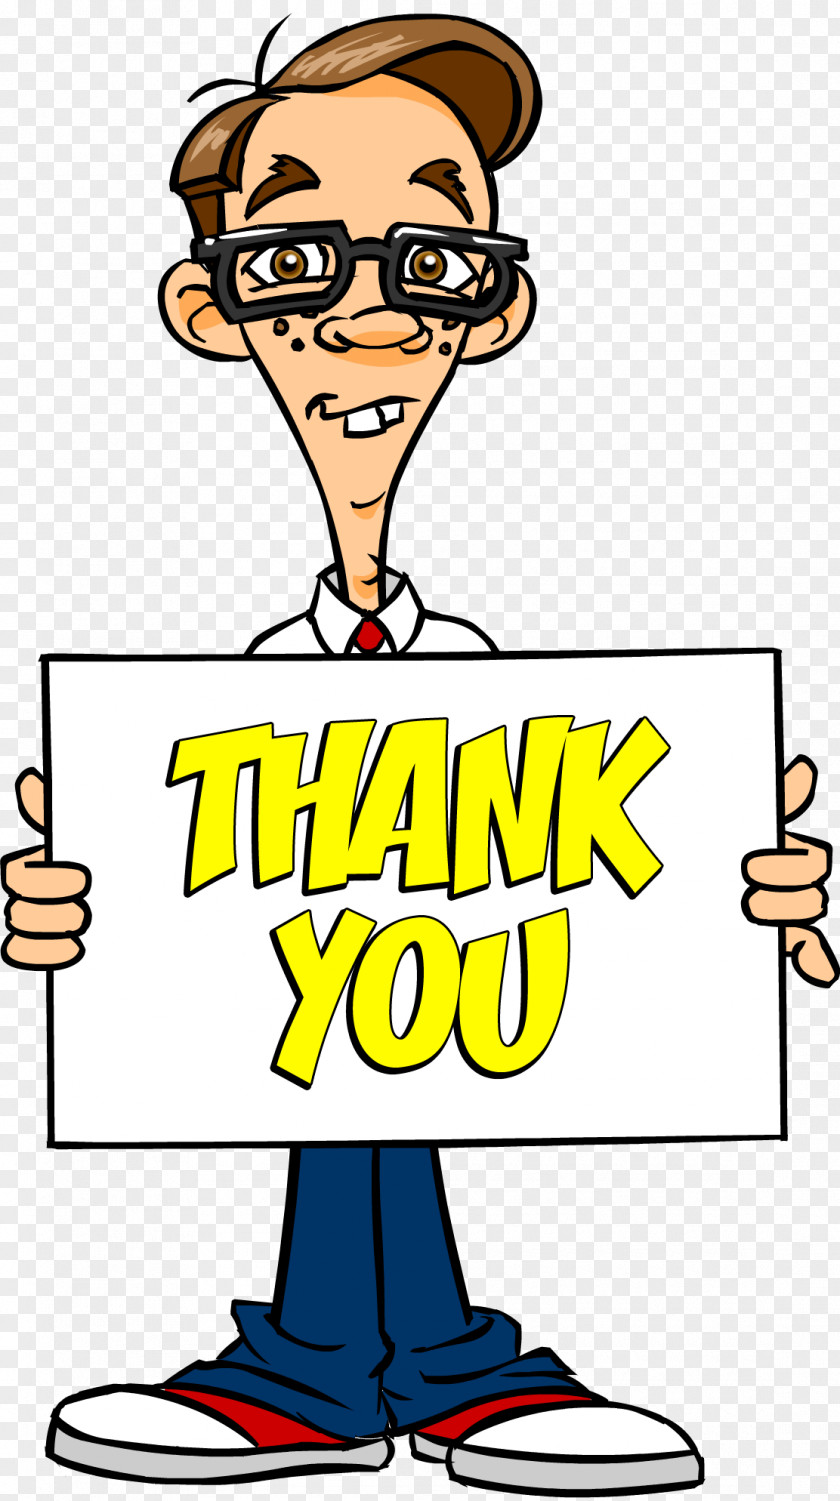 Thank You Very Much Computer Repair Technician Laptop Dell Clip Art PNG